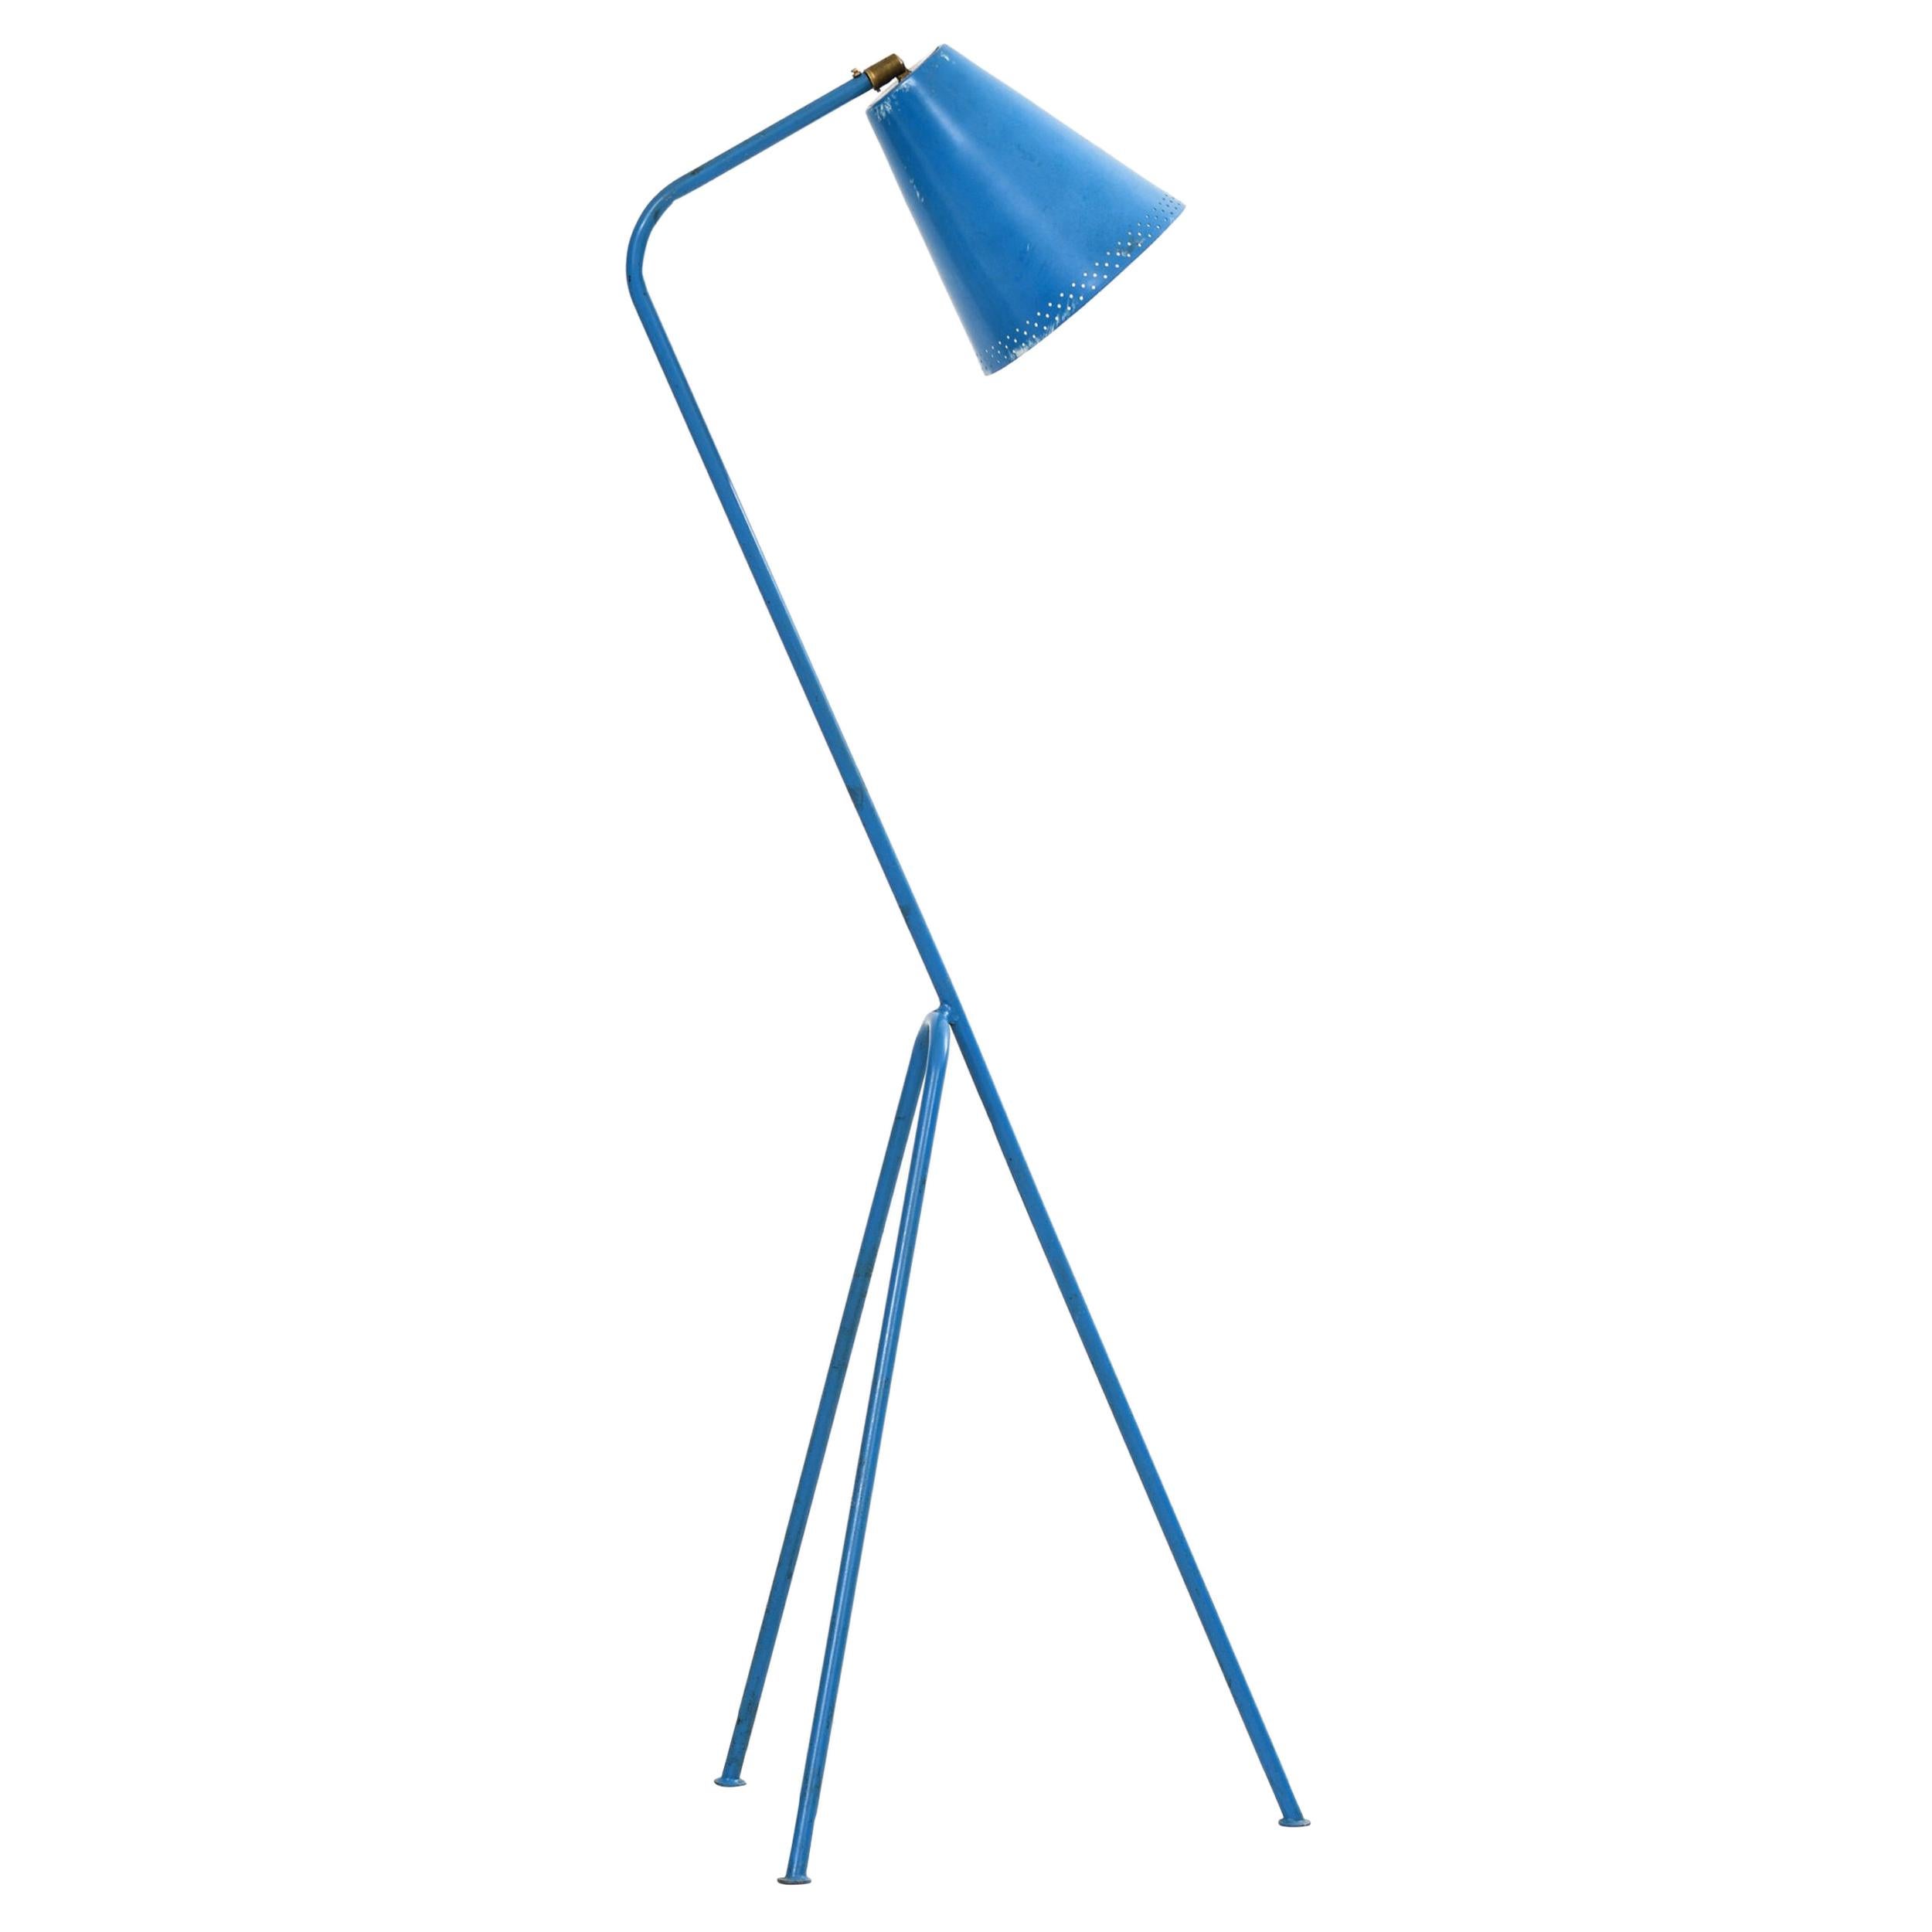 Floor Lamp in the Style of Greta Magnusson-Grossman Probably Produced in Sweden